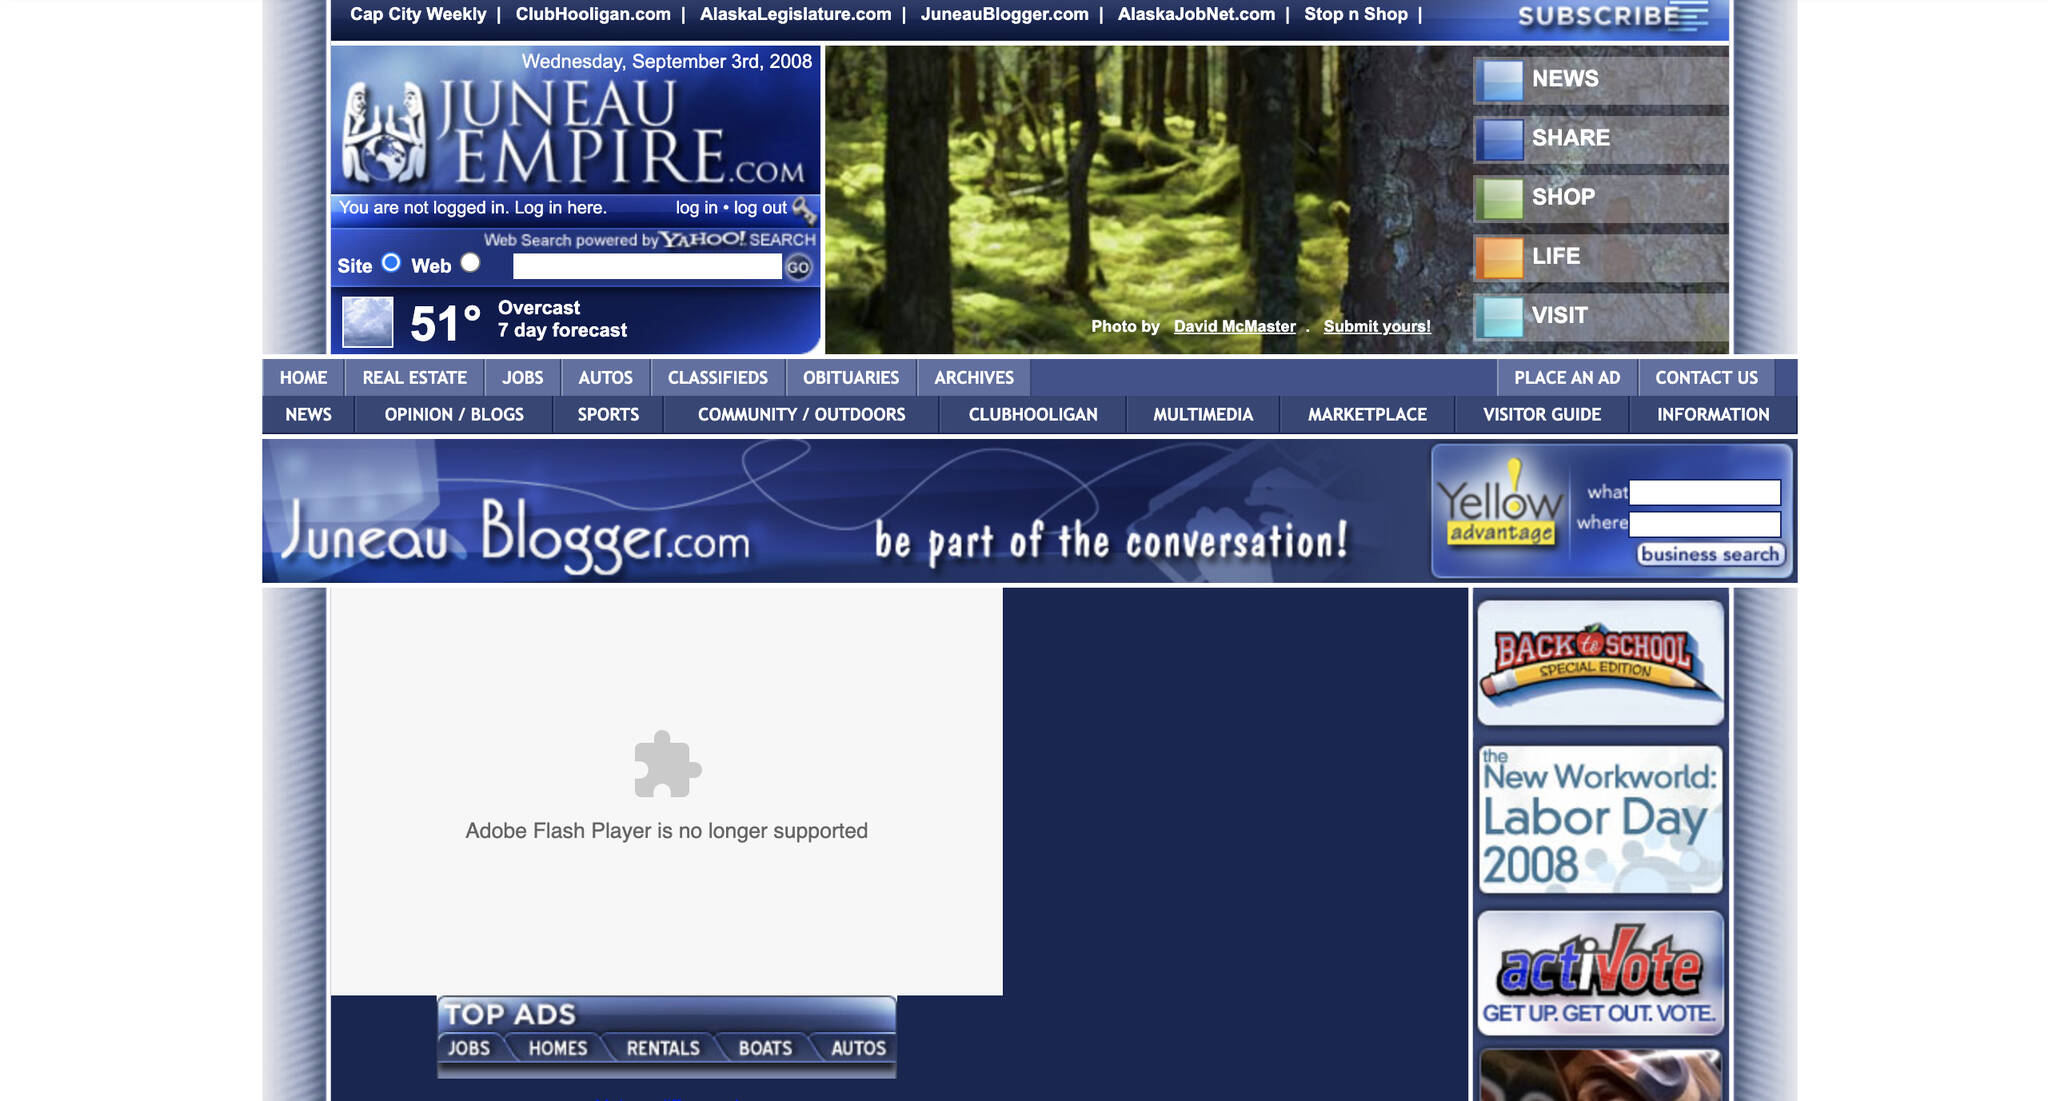 The homepage of the Juneau Empire’s website on Sept. 3, 2008, features an empty box where multimedia content by the now-obsolete Adobe Flash once appeared. (Screenshot of juneauempire.com from the Internet Archive)